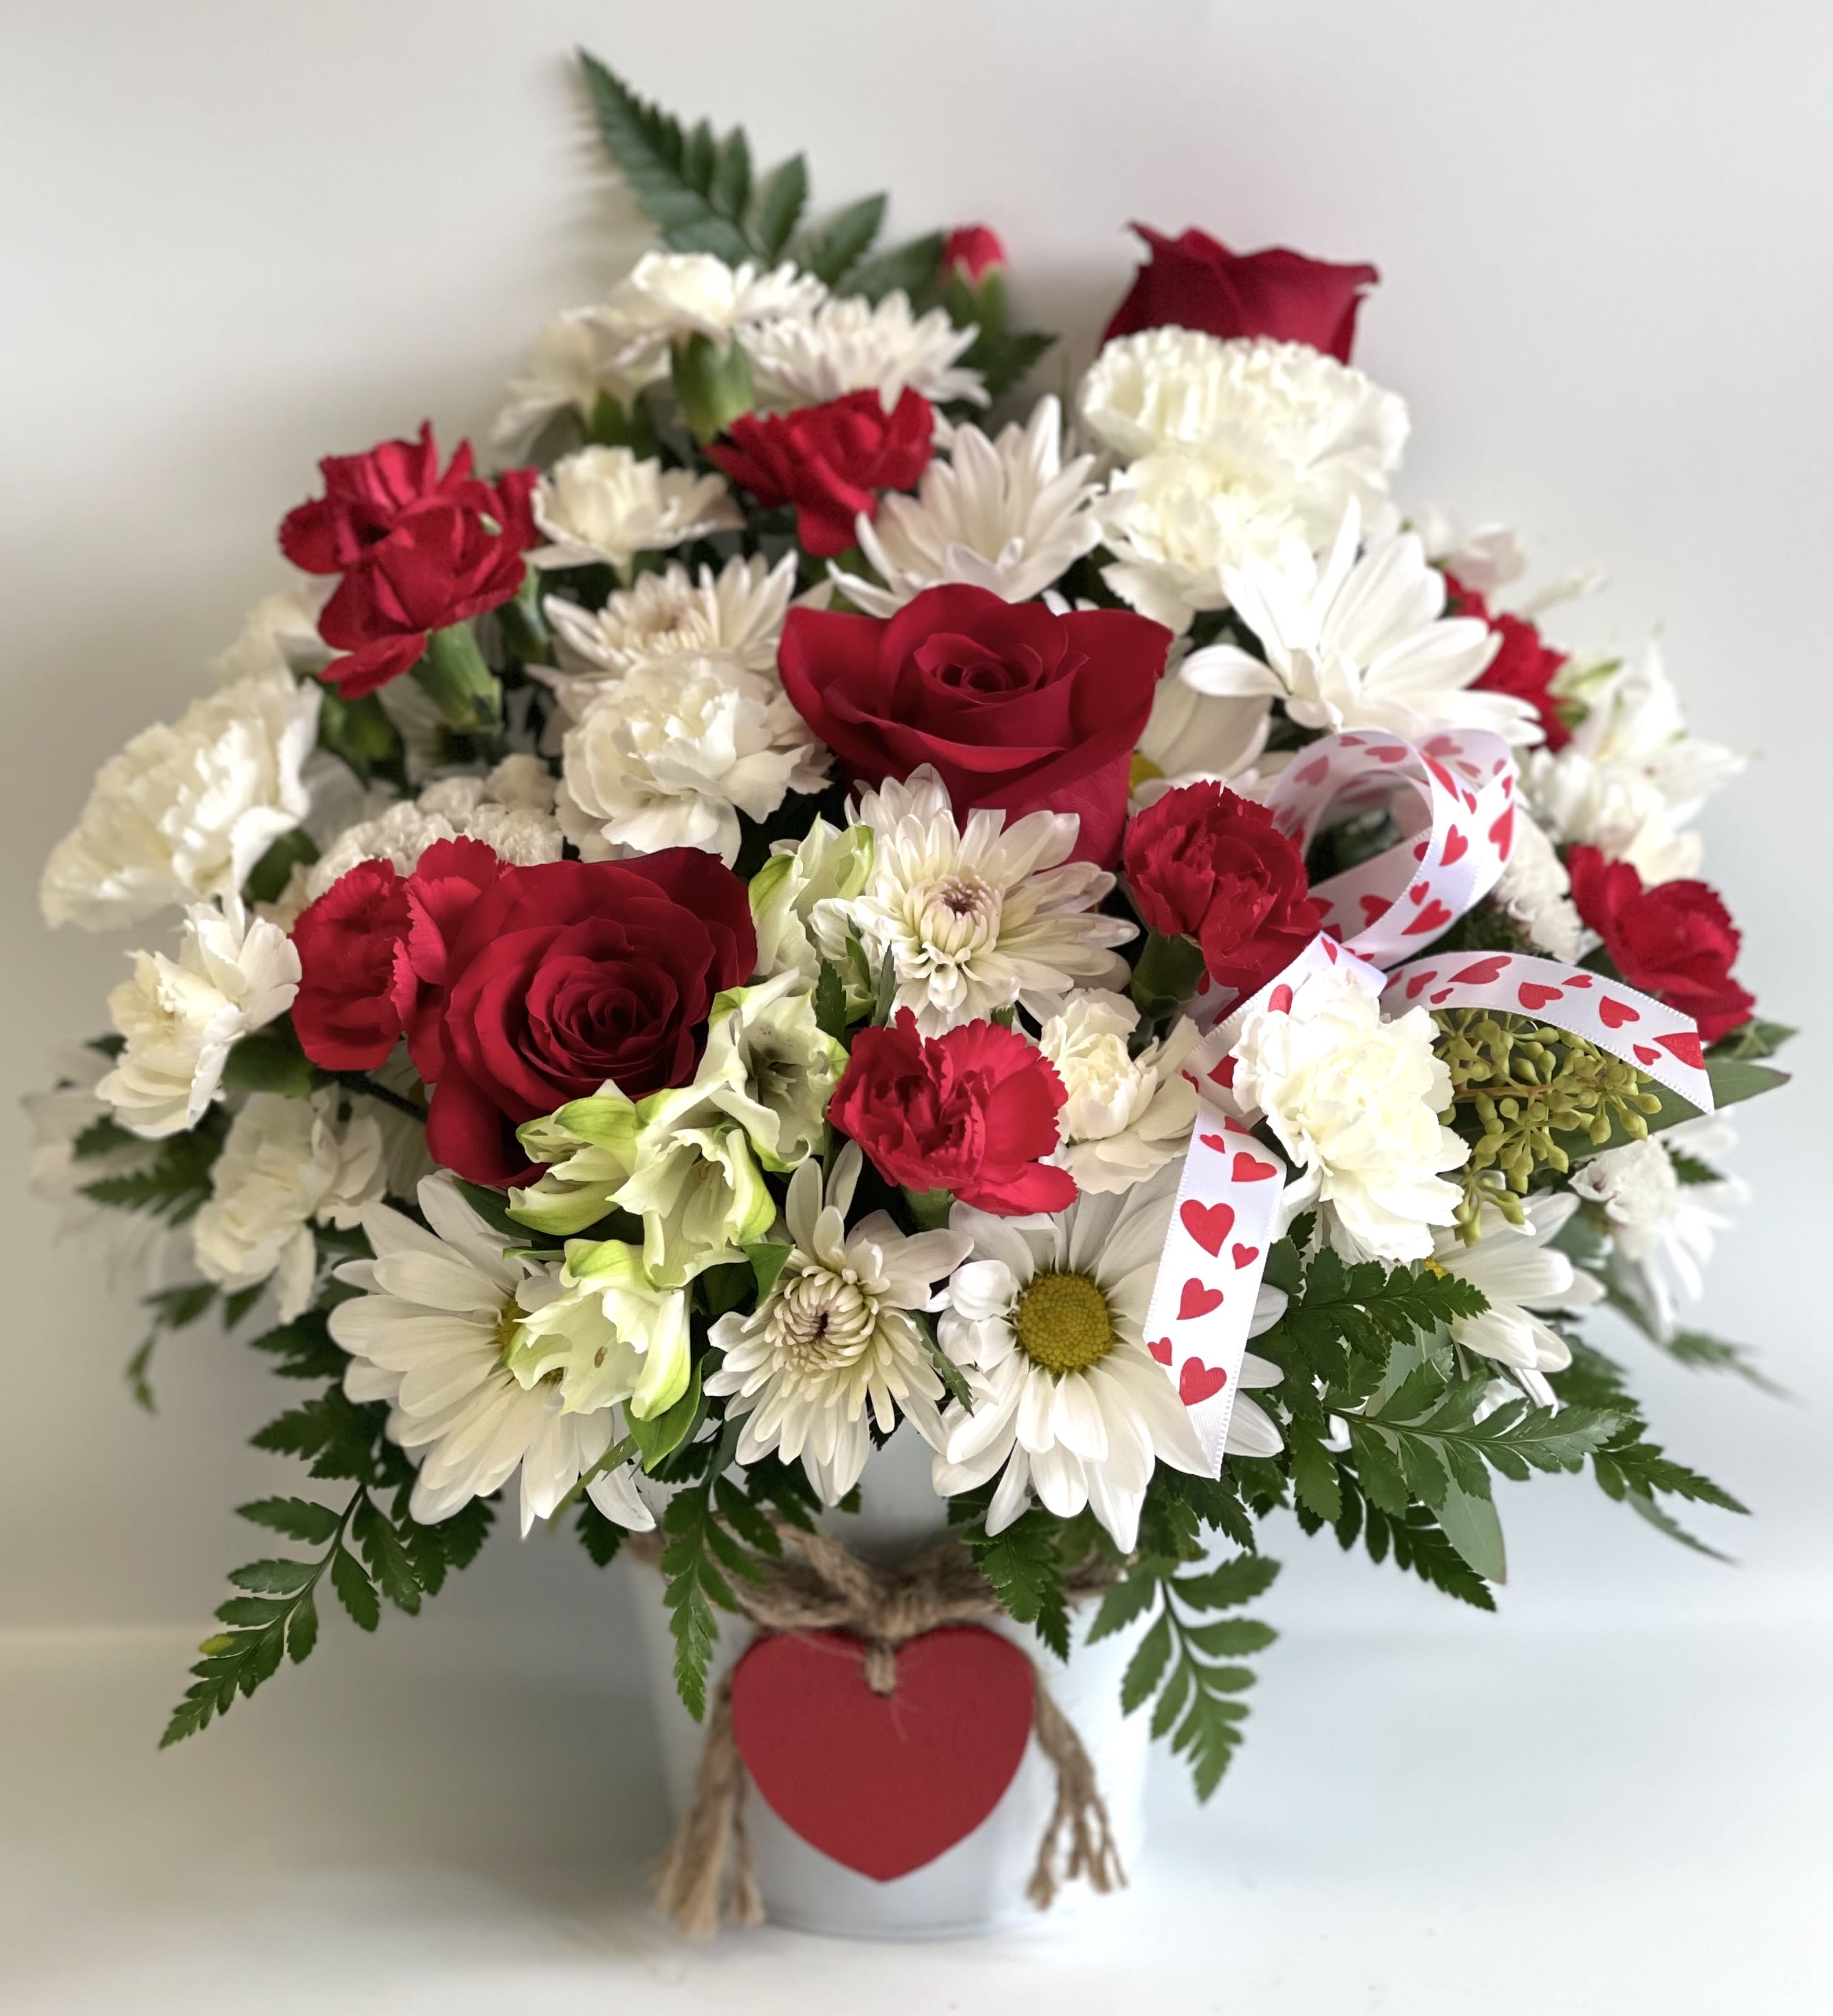 Date Night by Barb’s Flowers - This large metal bucket is filled with a traditional design bouquet. Has a wooden heart hanging on the front. 